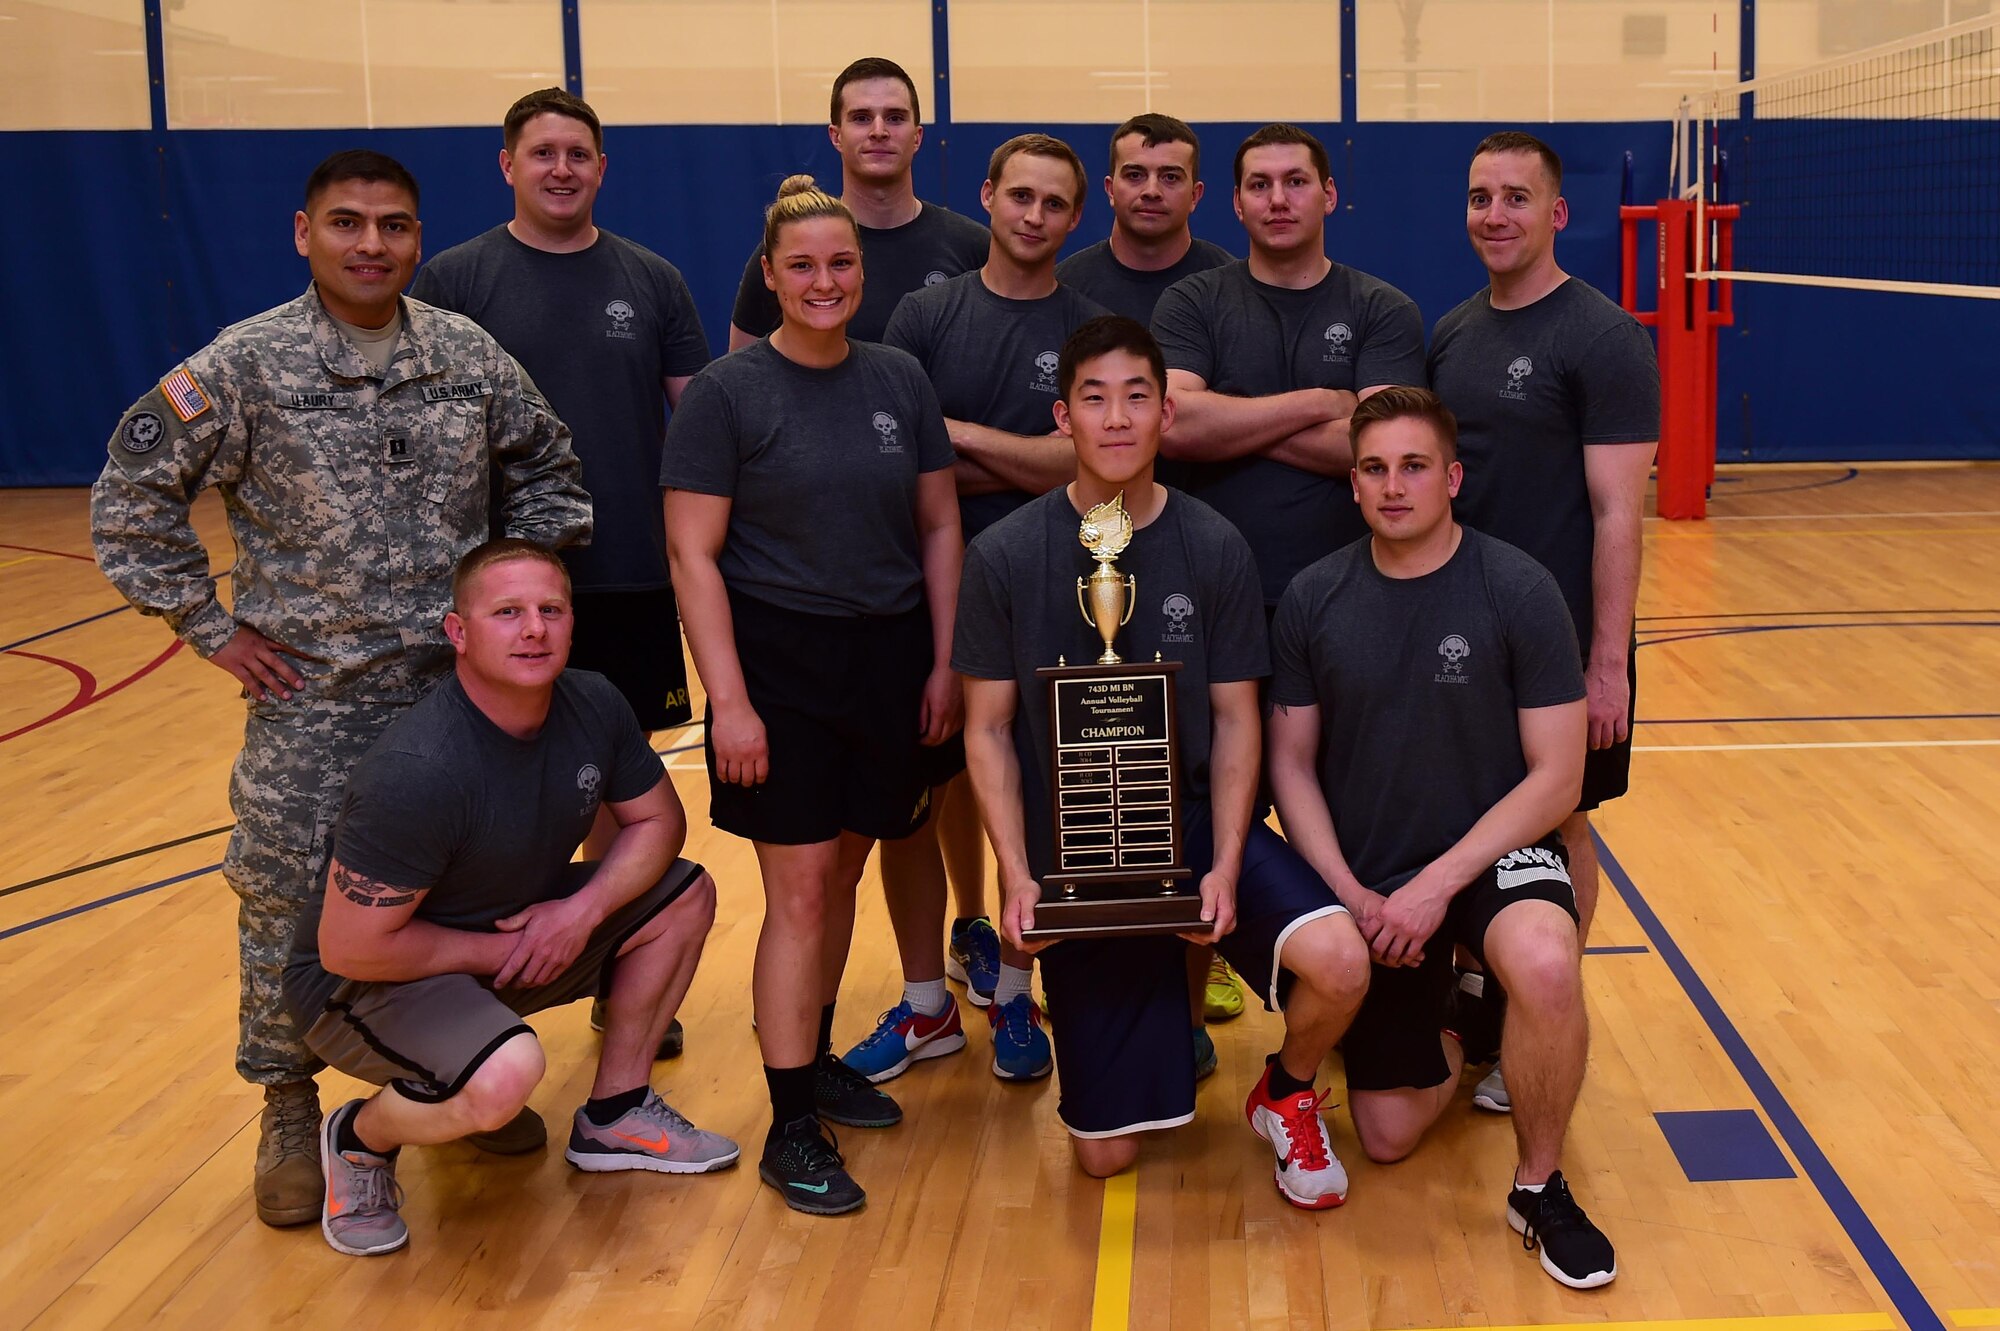 Members of the 743d Military Intelligence Battalion gather together after winning an annual volleyball tournament April 28, 2016, at the Buckley Fitness Center on Buckley Air Force Base, Colo. The tournament, a Commander’s Cup event, provided bragging rights to the winning team and allowed participants the opportunity for inter-battalion competition. (U.S. Air Force photo by Airman 1st Class Gabrielle Spradling/Released)